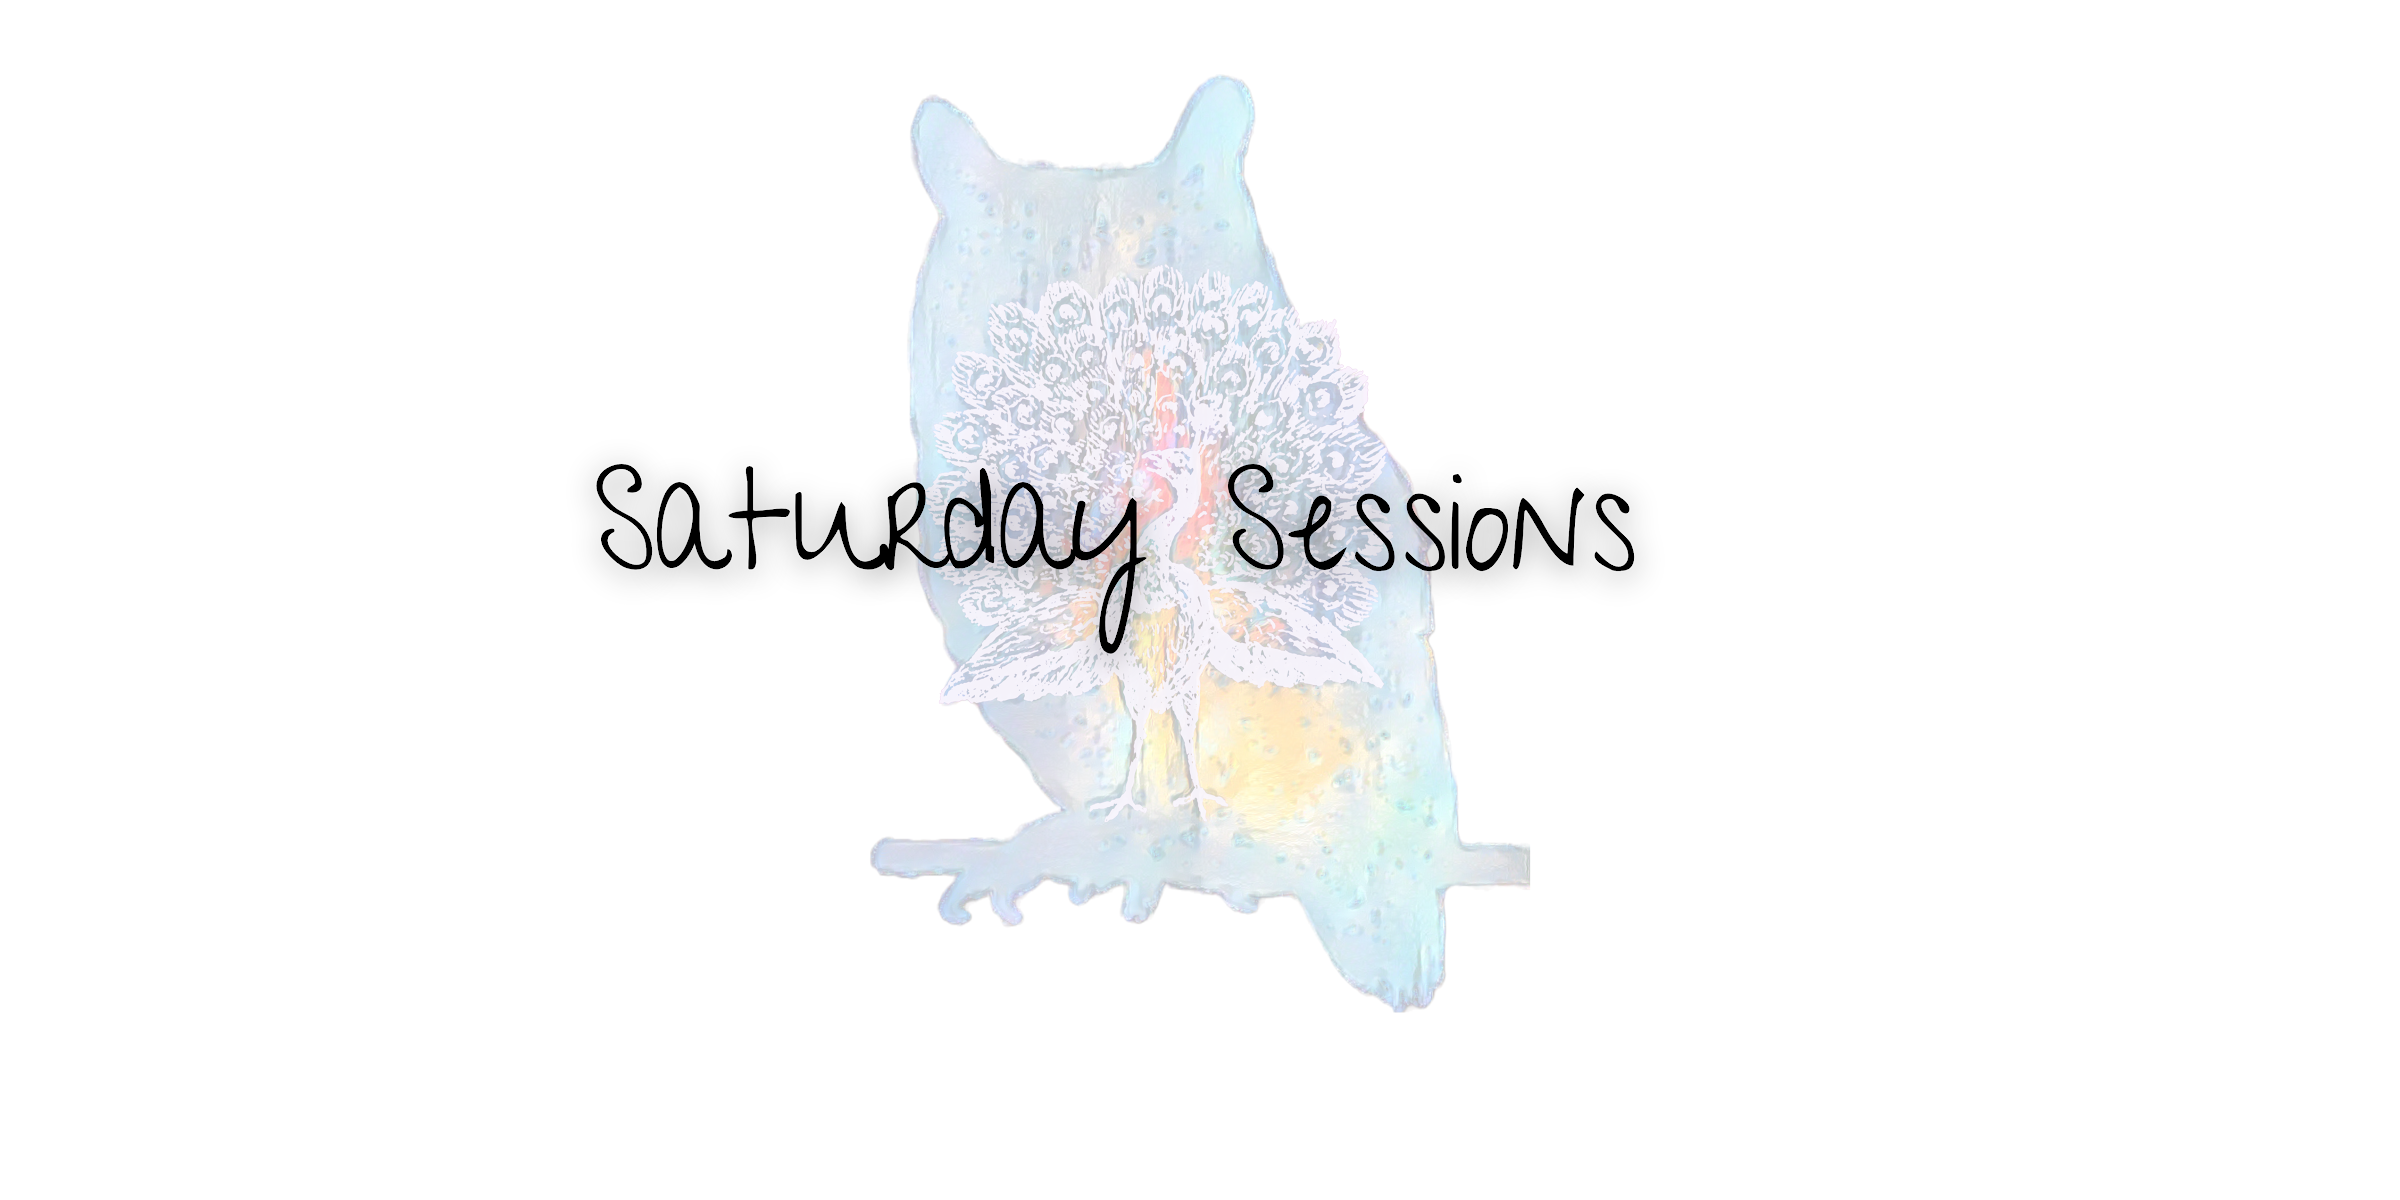 Saturday Sessions: A New Beginning: Redesigning My Website as I Embrace My Anxiety, ADHD, and Spiritual Self